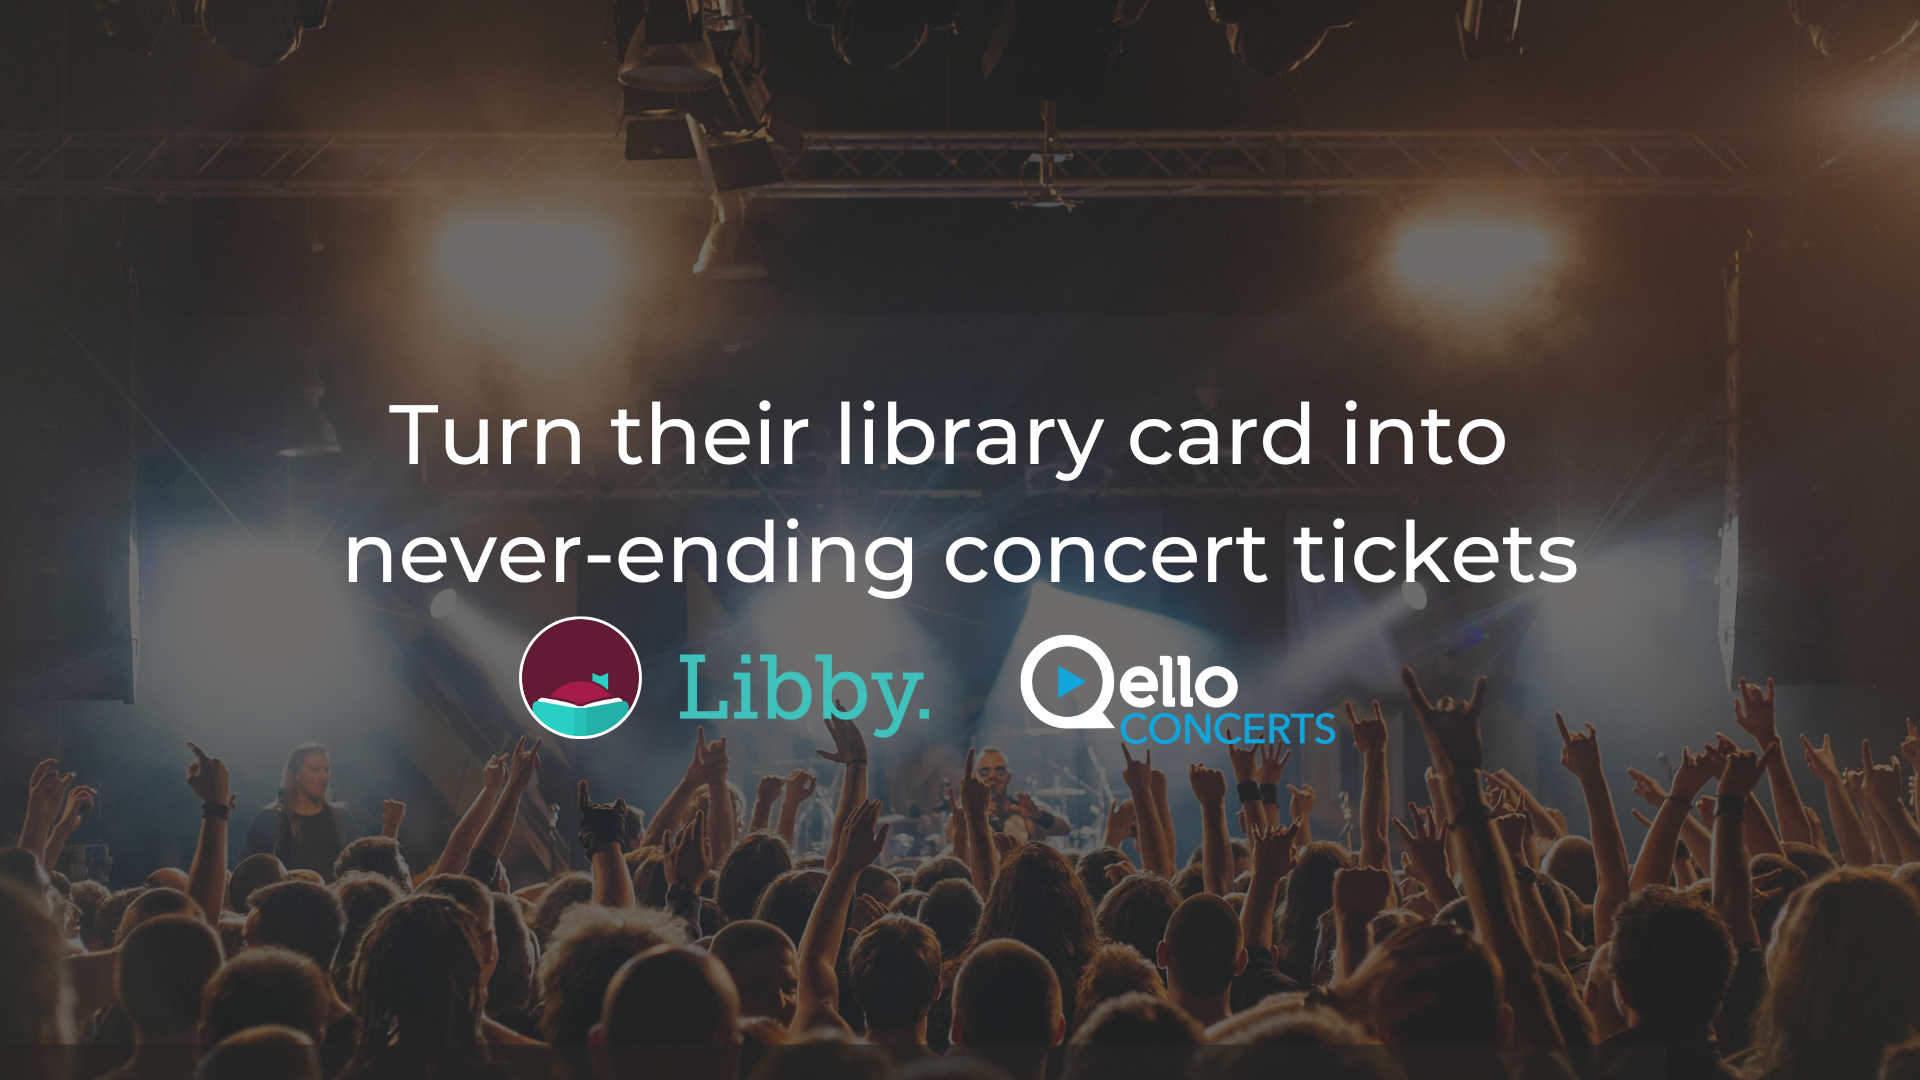 With Qello, you can turn library cards into concert tickets